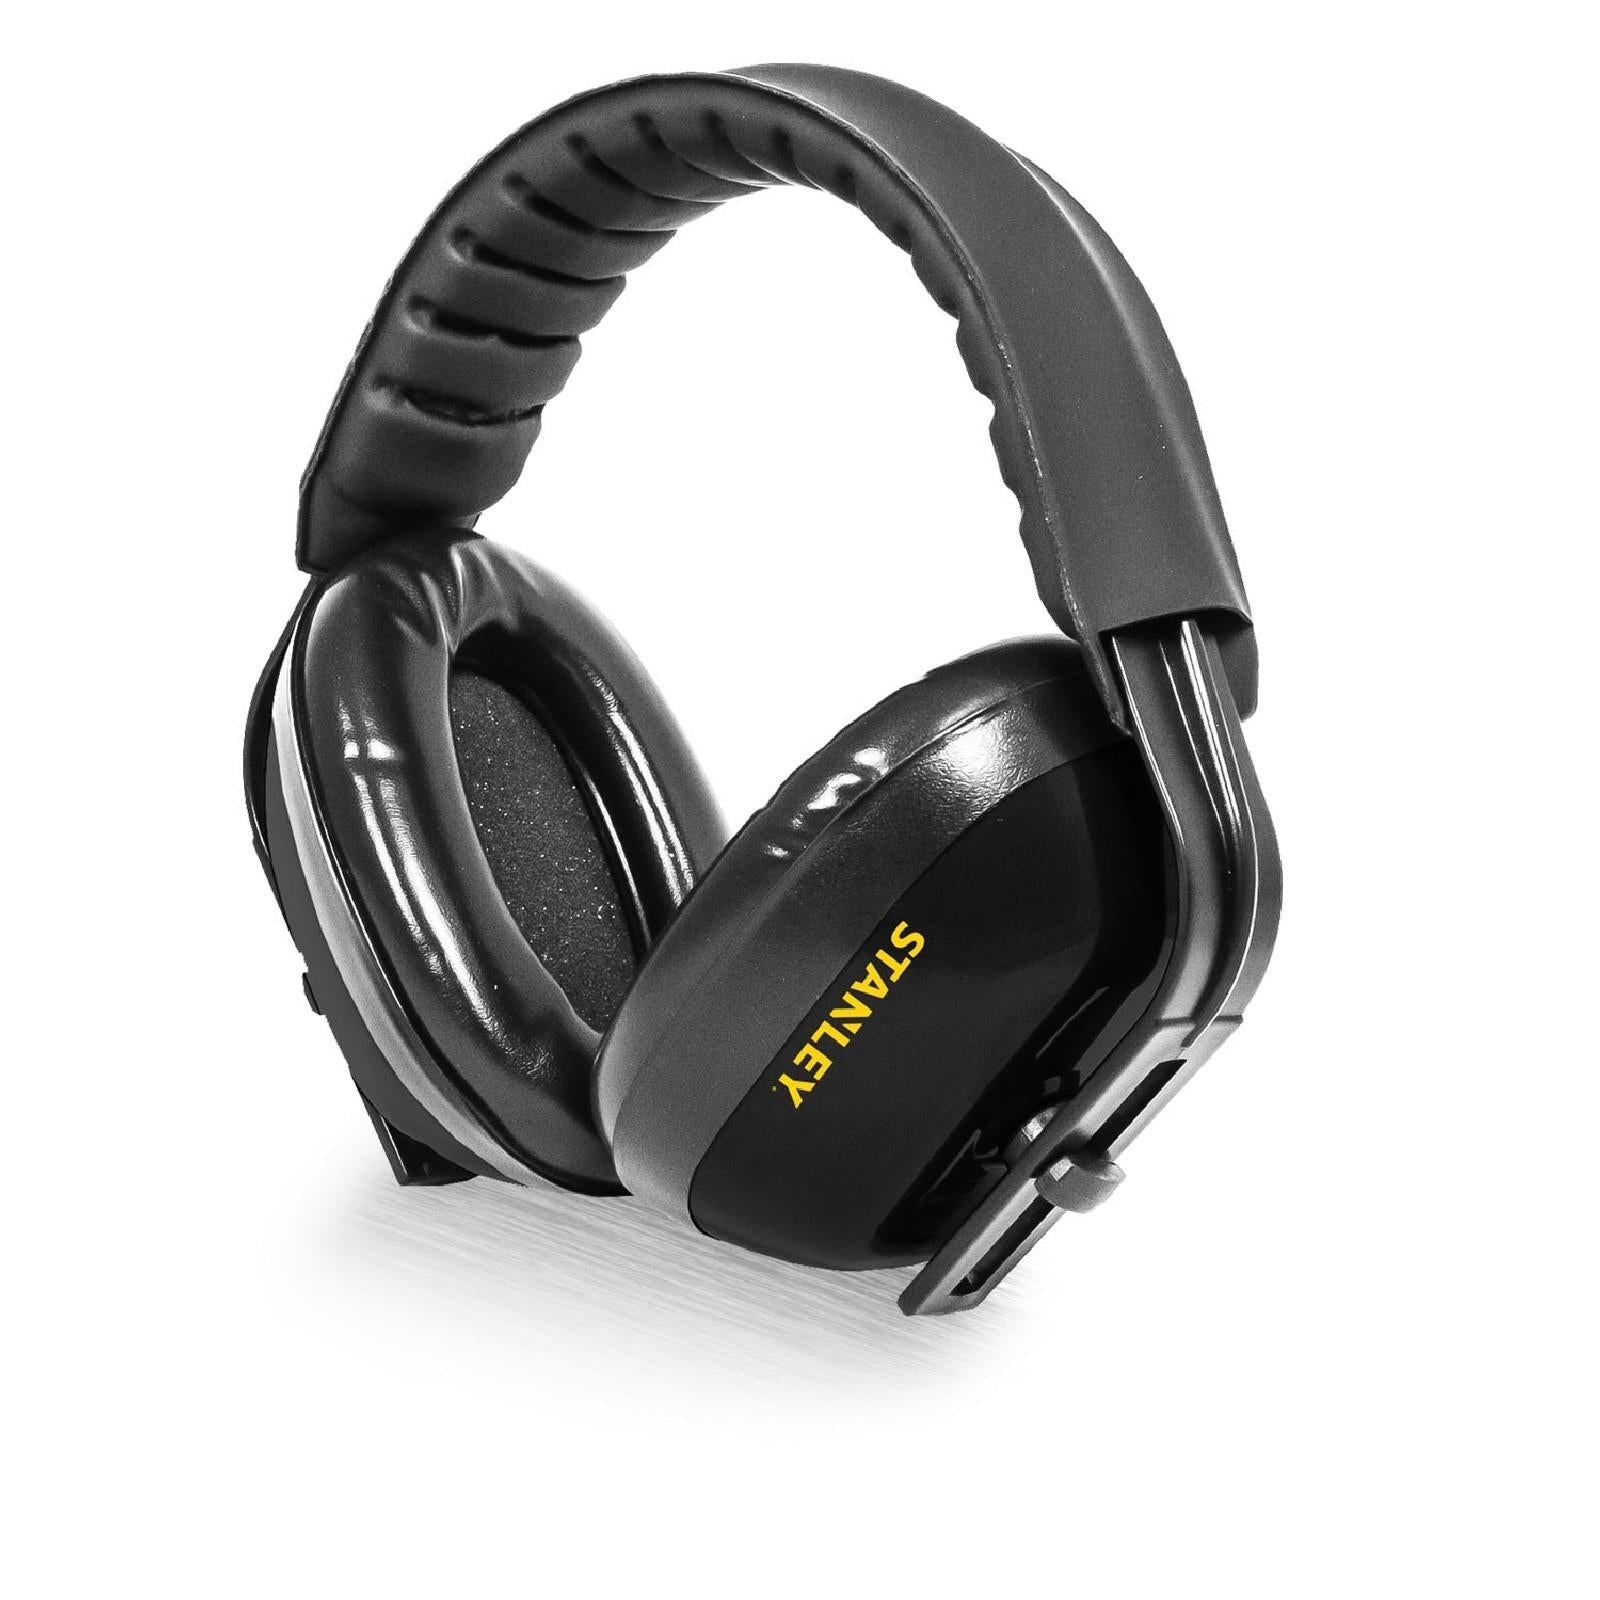 Stanley ear defender with a padded headband for extra comfort #SY345C